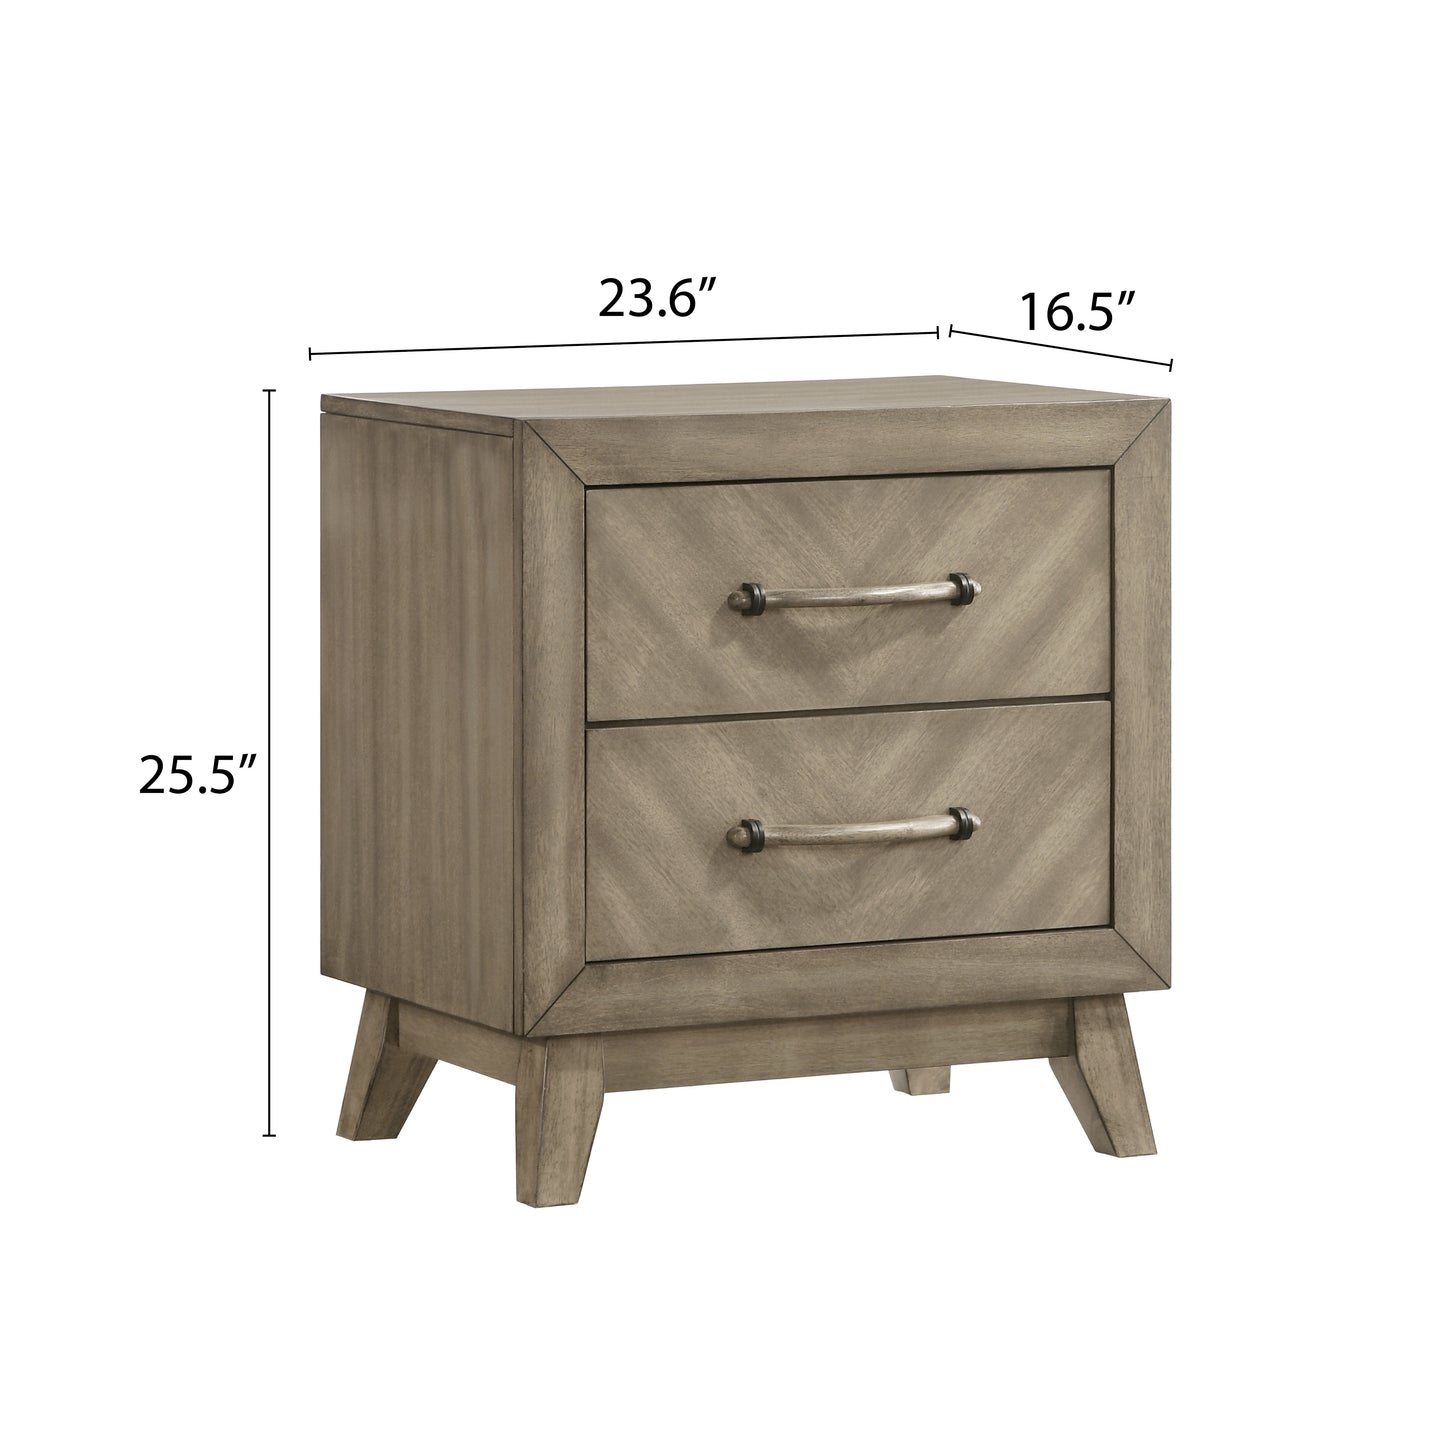 Roundhill Furniture Arena Contemporary 2-Drawer Nightstand in Antique Gray